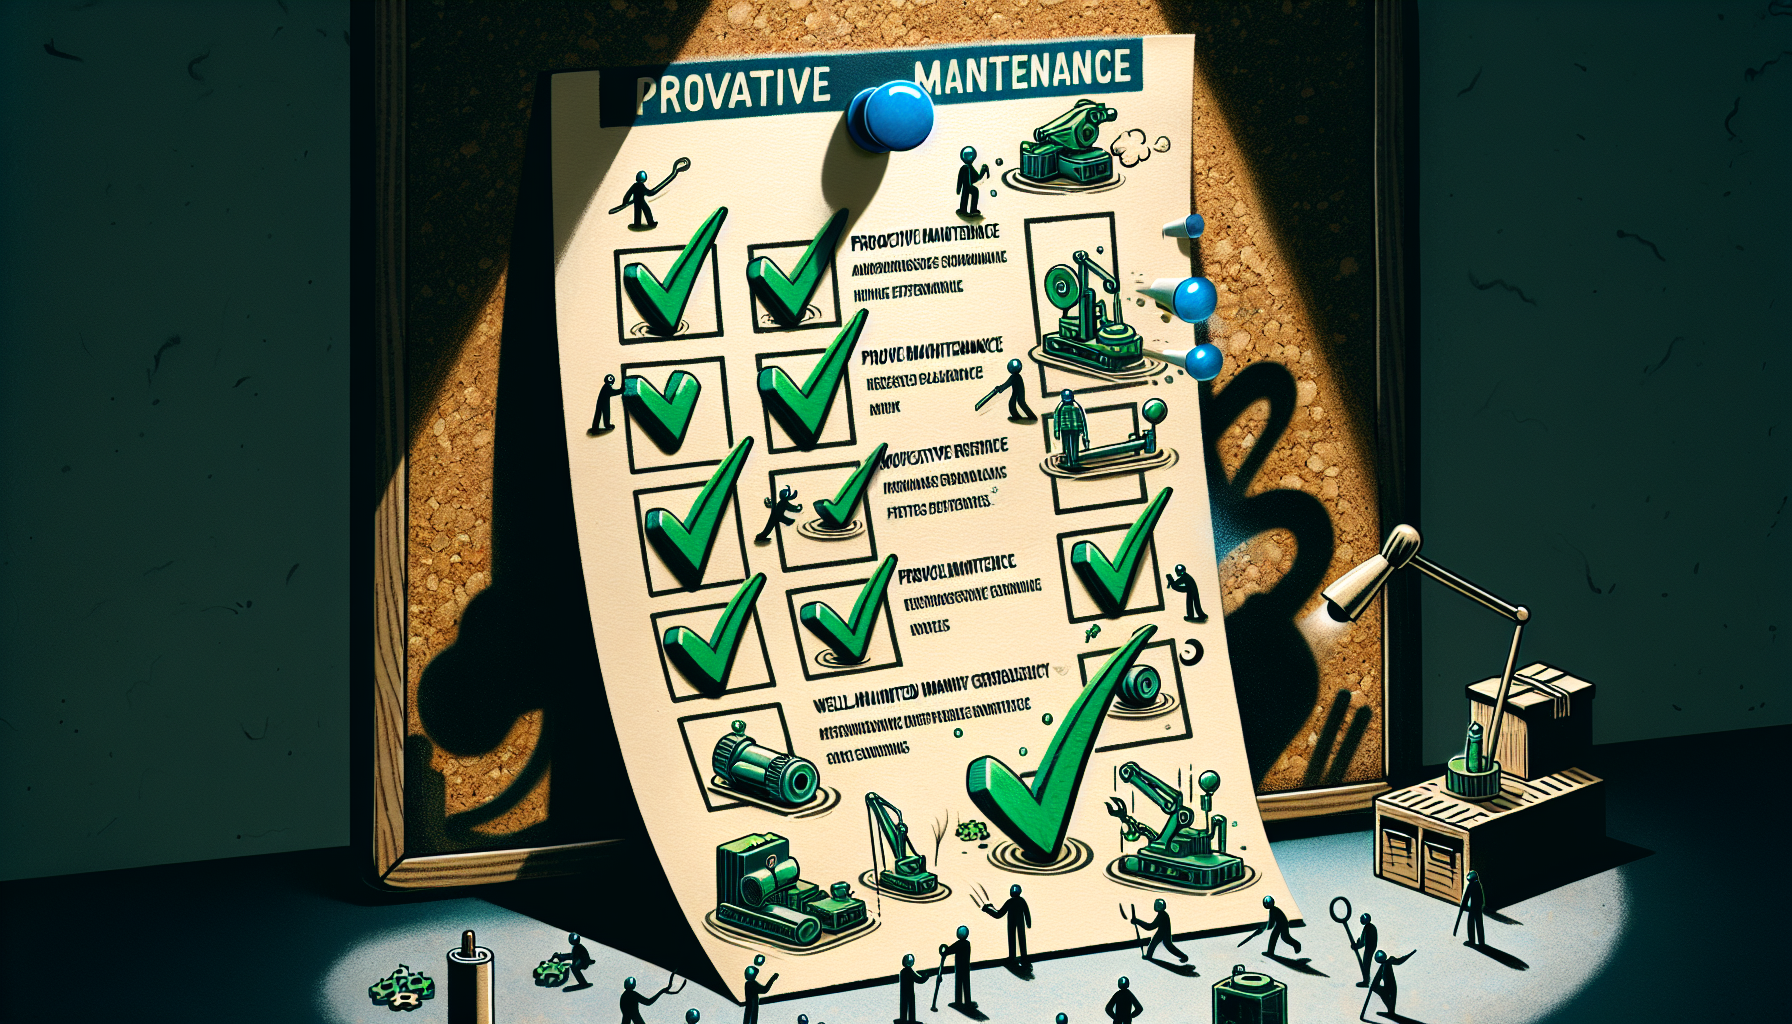 Illustration of proactive maintenance checklist with tick marks